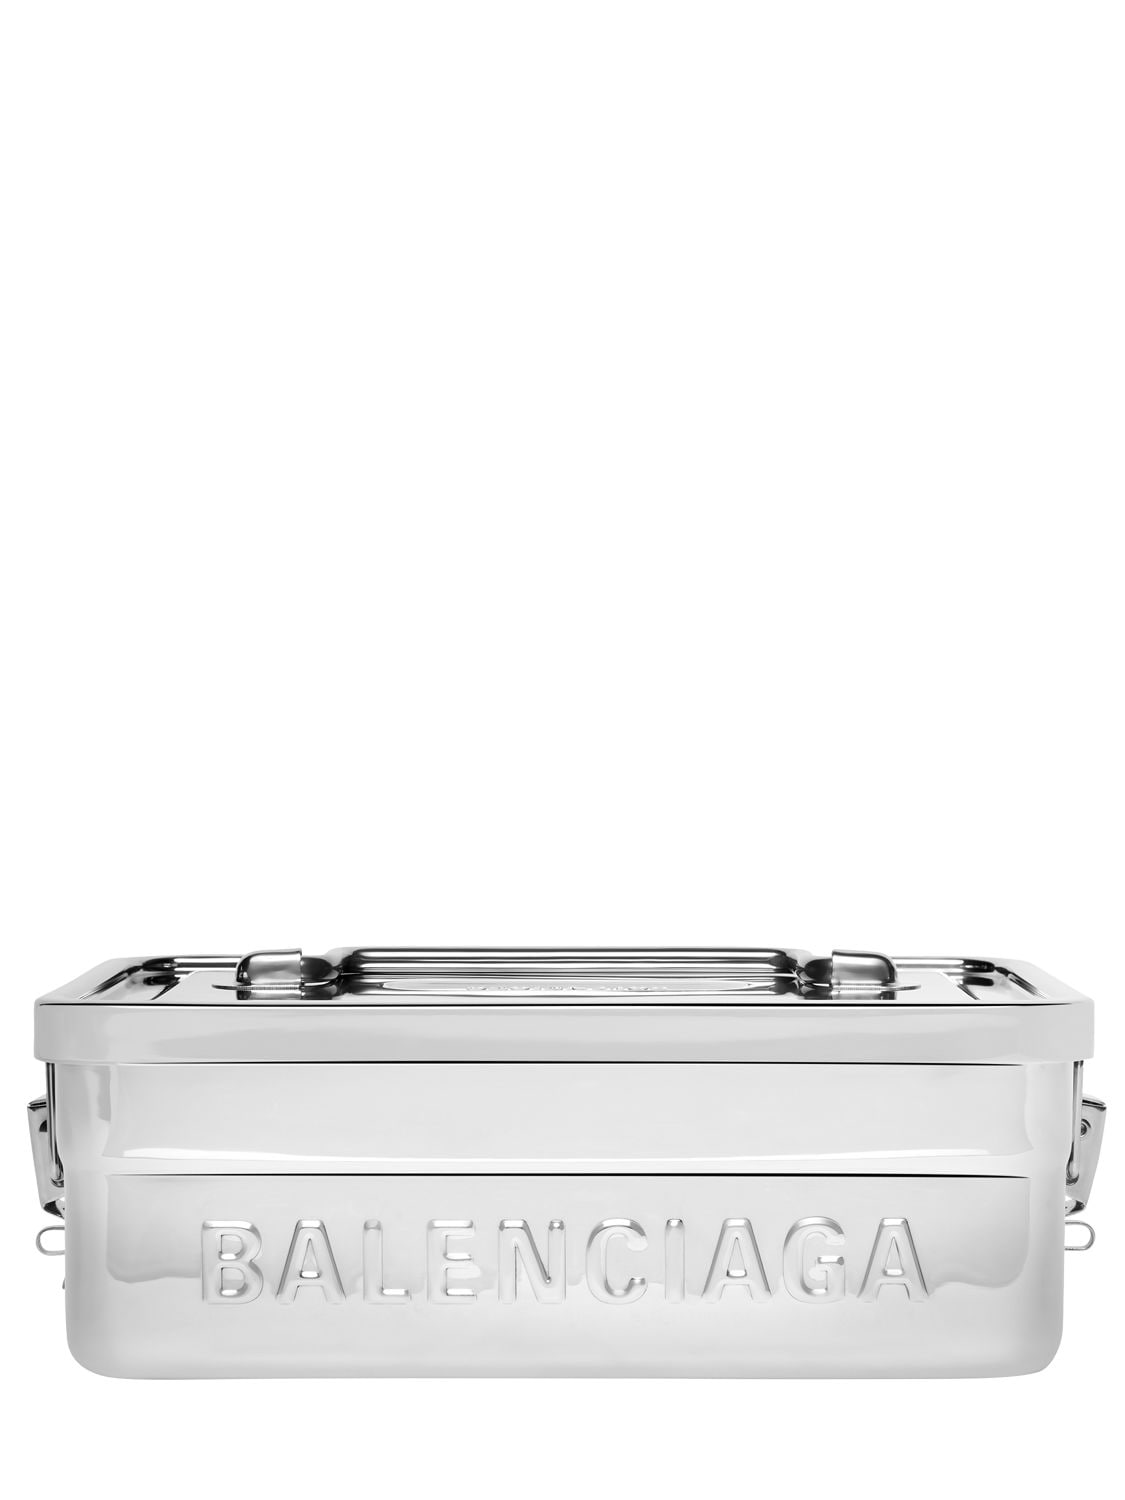 Balenciaga Logo Detail Stainless Steel Lunch Box In Silver